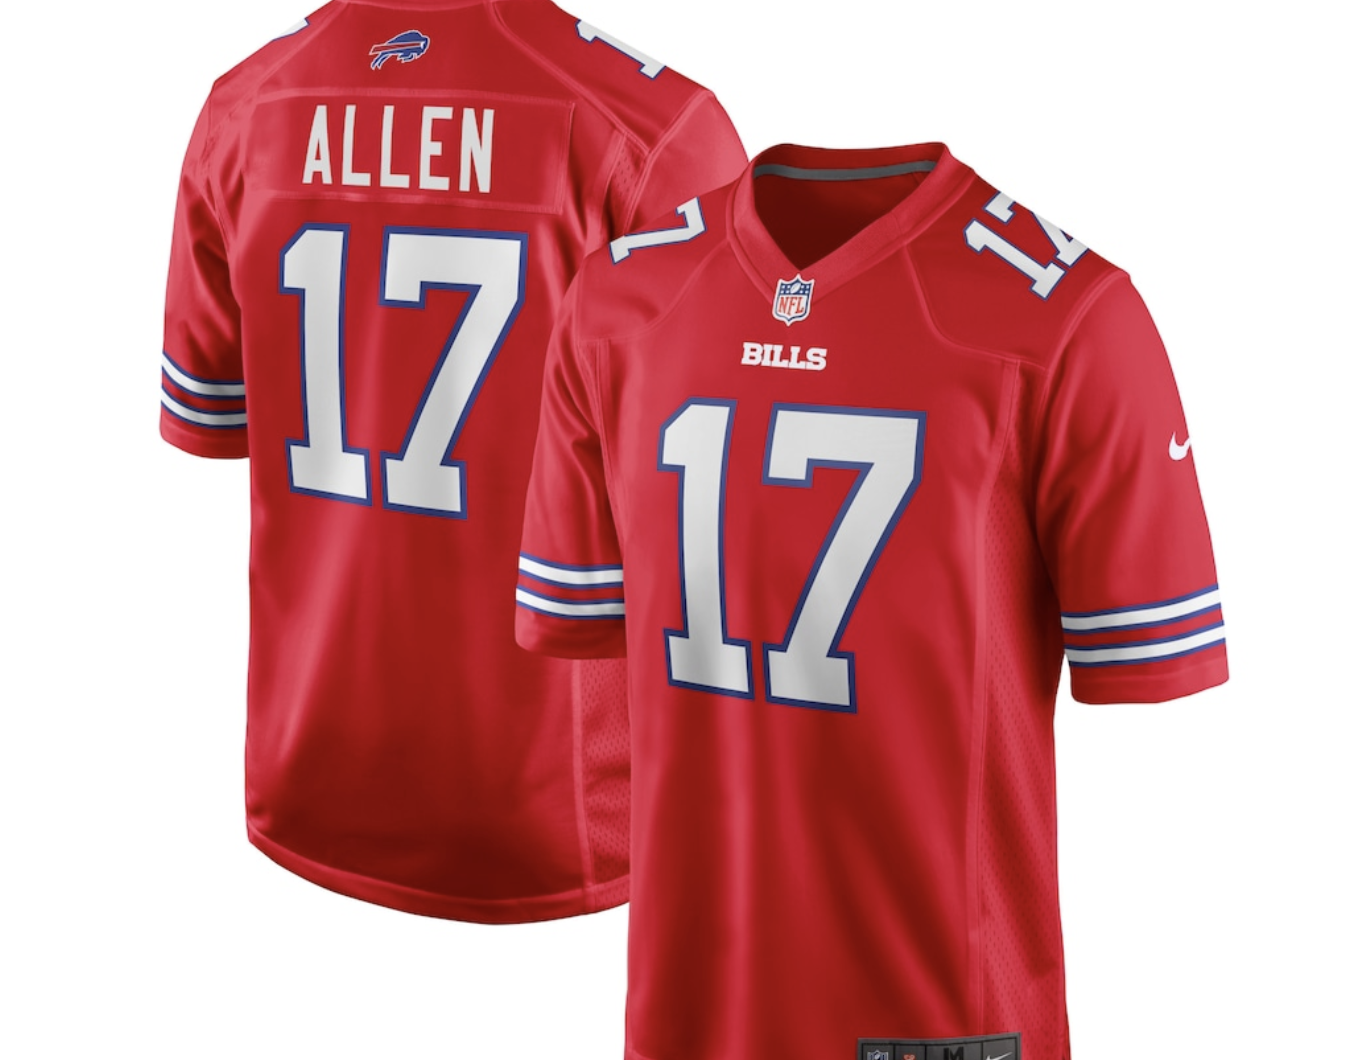 Details about   new men's stitched Allen jersey S to 3XL colors bue/ white/ red/ Navy Bills 